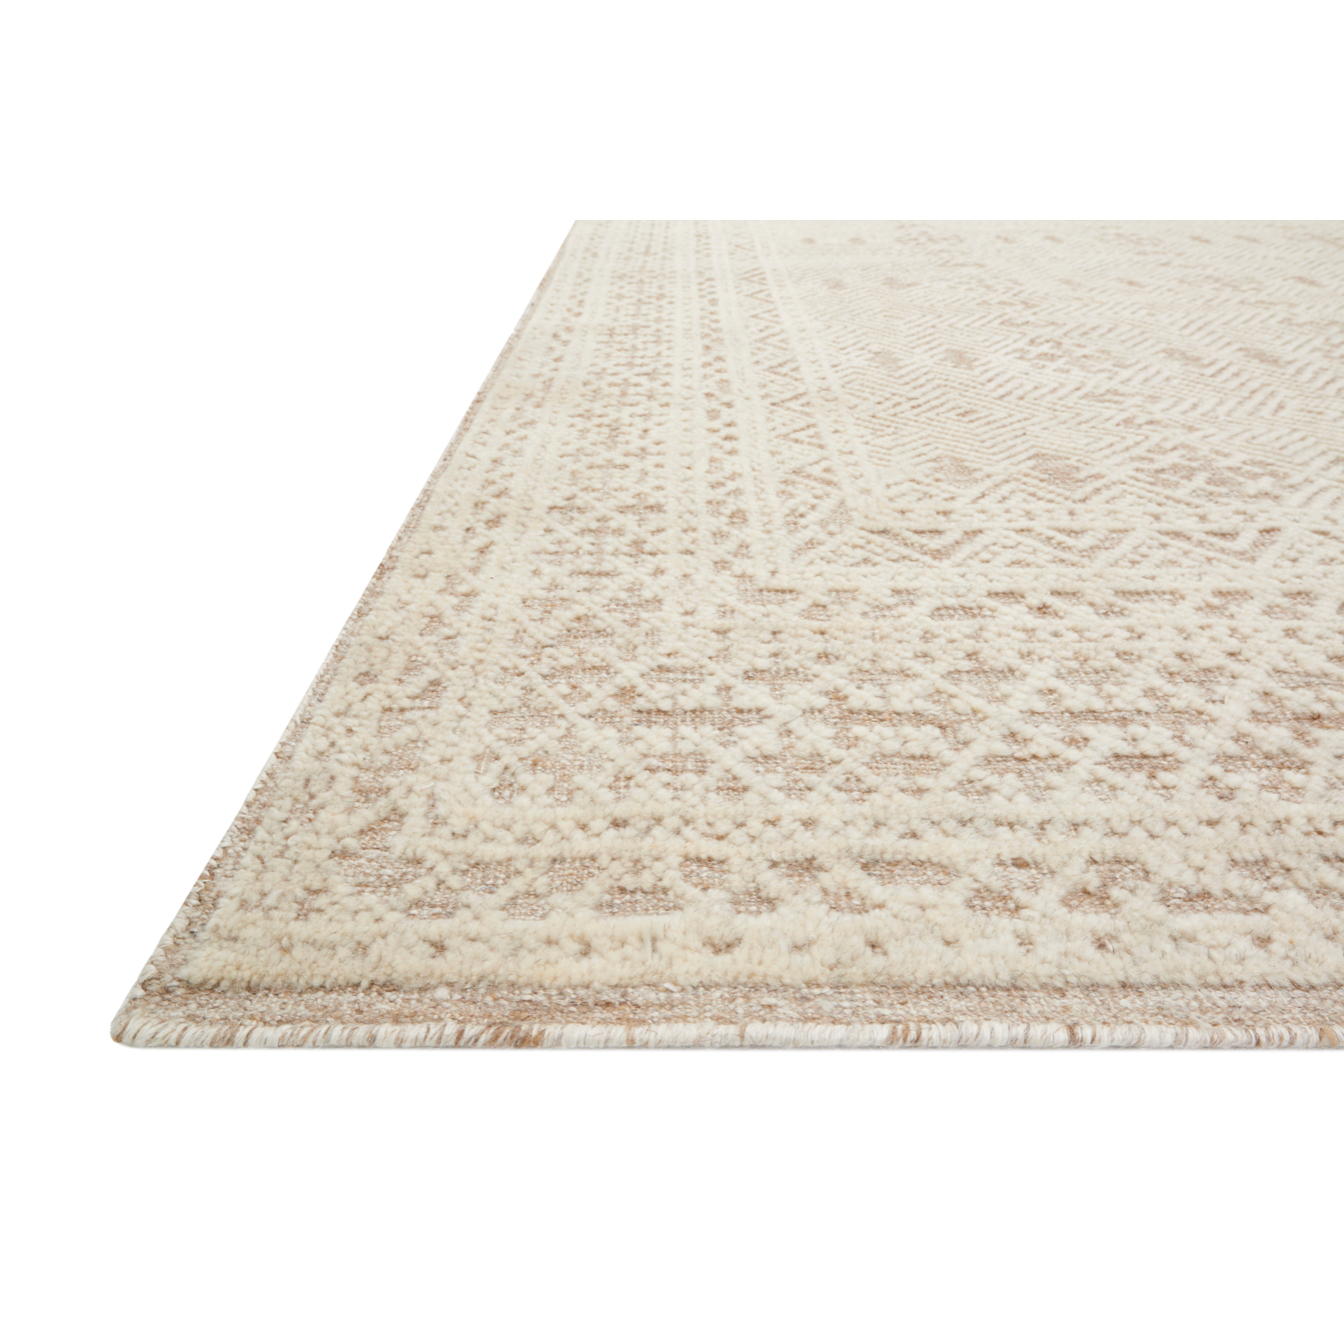 The Origin Oatmeal / Ivory area rug from Loloi is hand-knotted by skilled artisans and offers a richly textured surface with pronounced visual depth. You will love this rug because the rug is:  Cozy and soft texture Very easy to clean and maintain Comes in big area rug sizes and as cute smaller sizes Perfect for a living room, bedroom, or dining room Gorgeous intricate pattern and patina to warm up any room